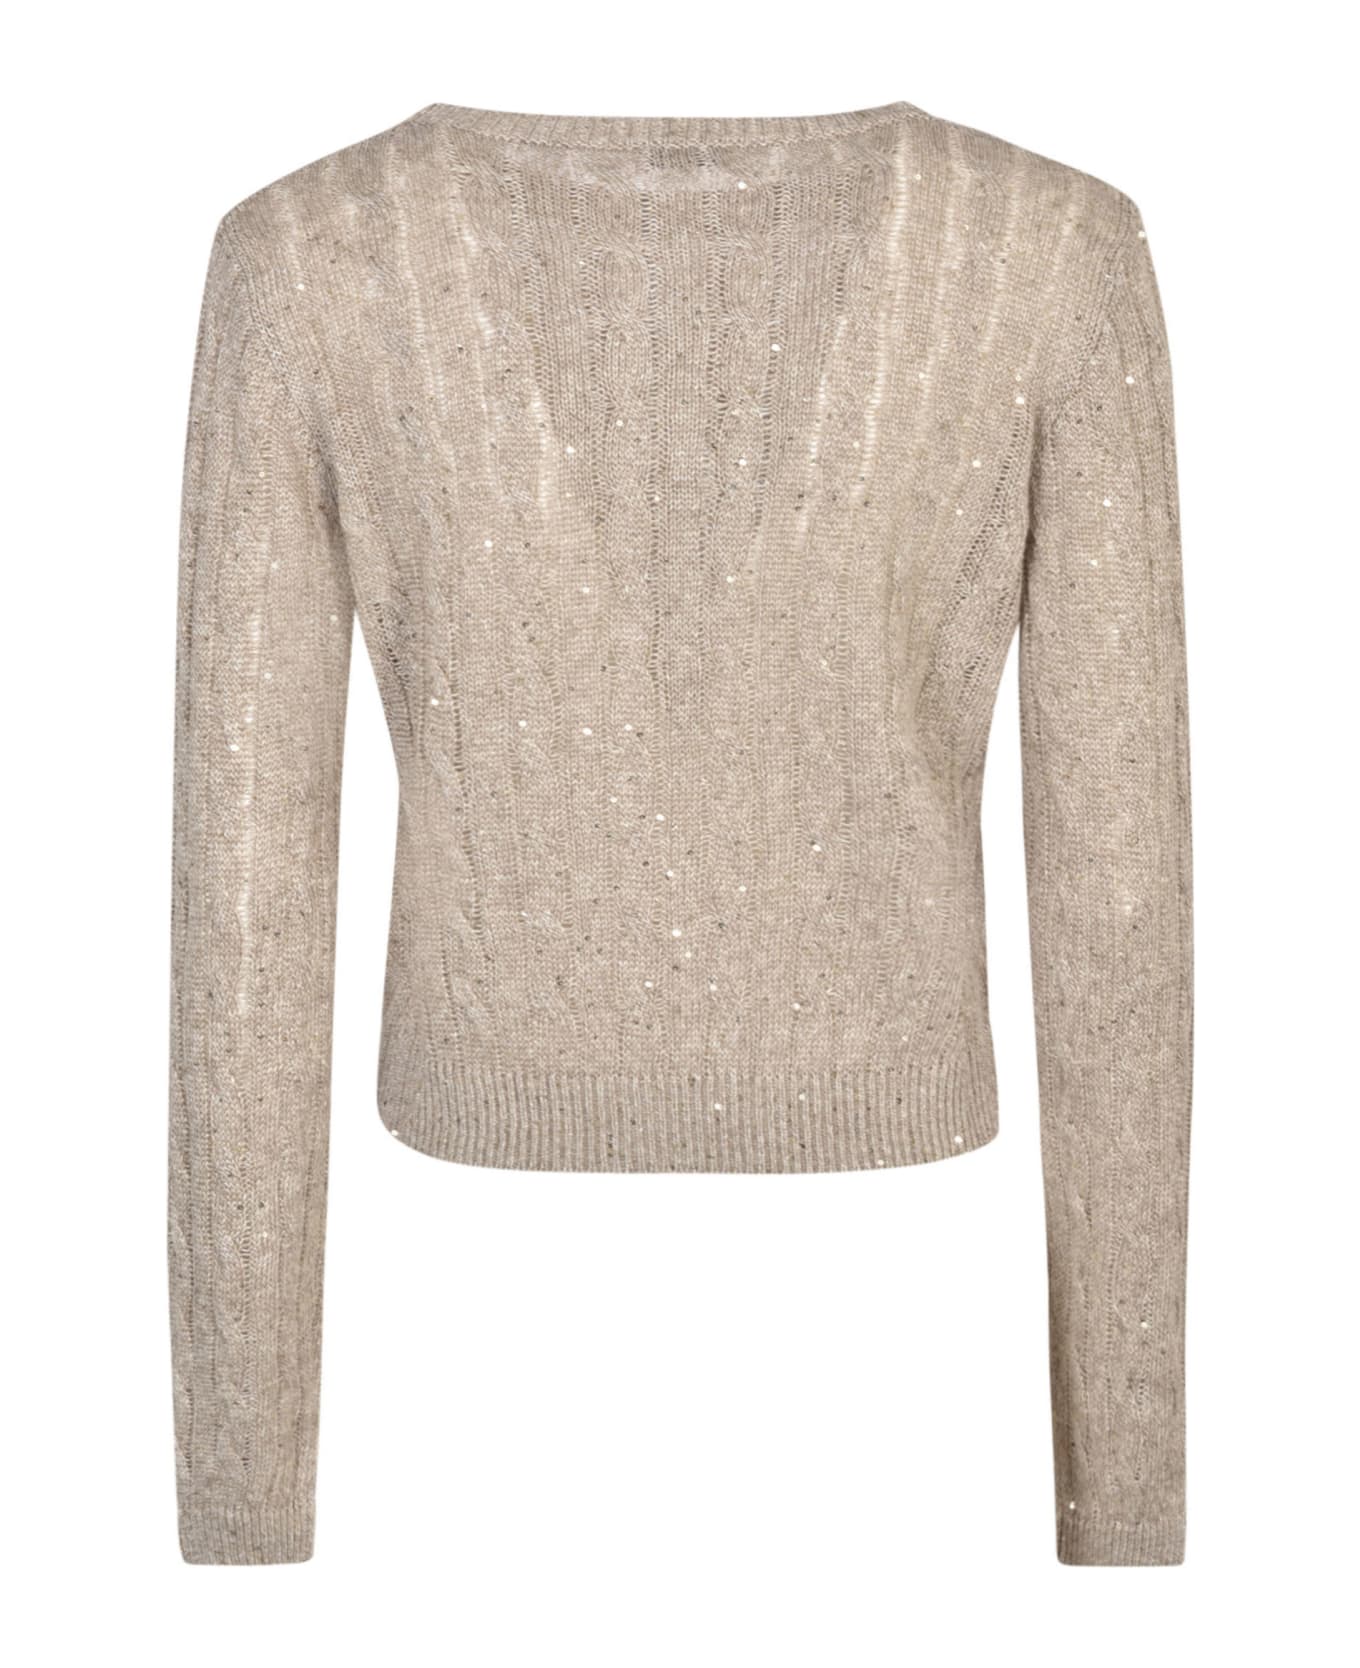 Brunello Cucinelli Micro Sequins Embellished Cable Knit Sweater - Beige